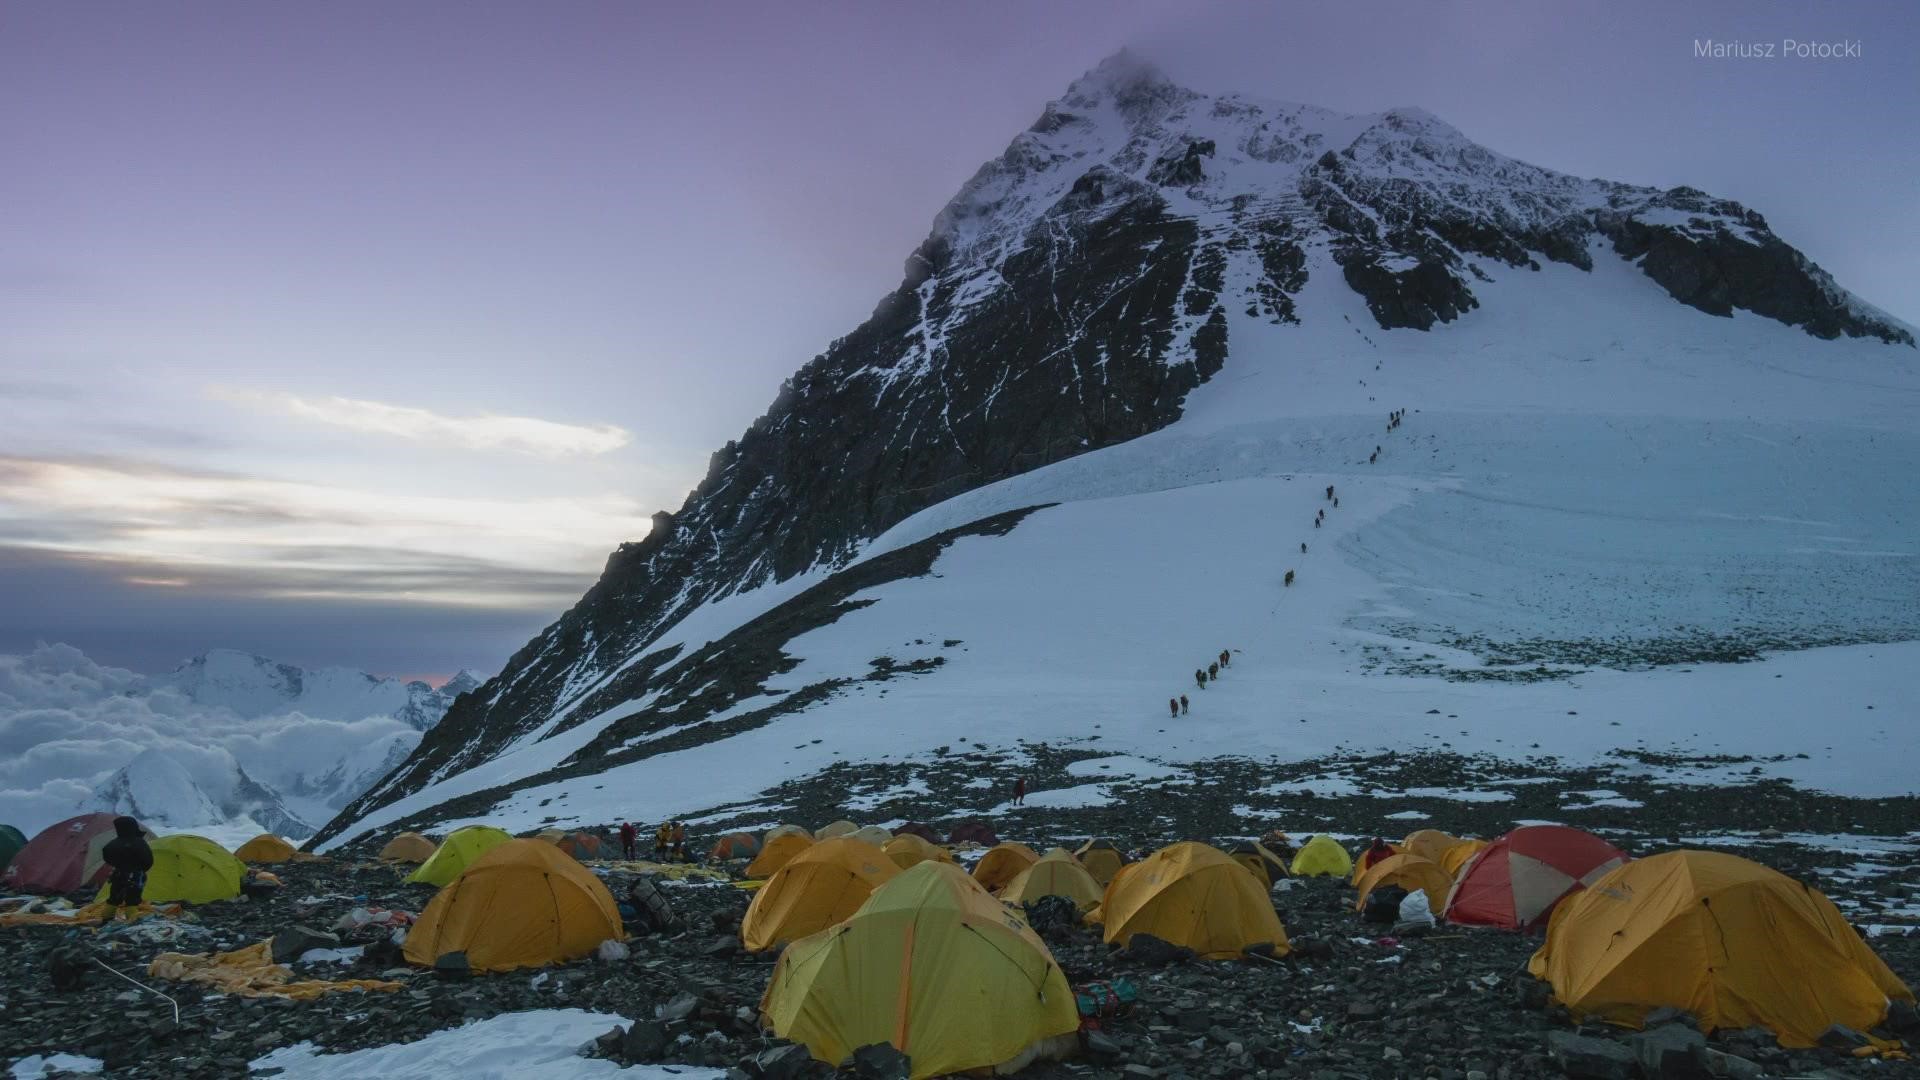 Six researchers from the University of Maine traveled to Mount Everest and are releasing their findings from their ice research conducted there.